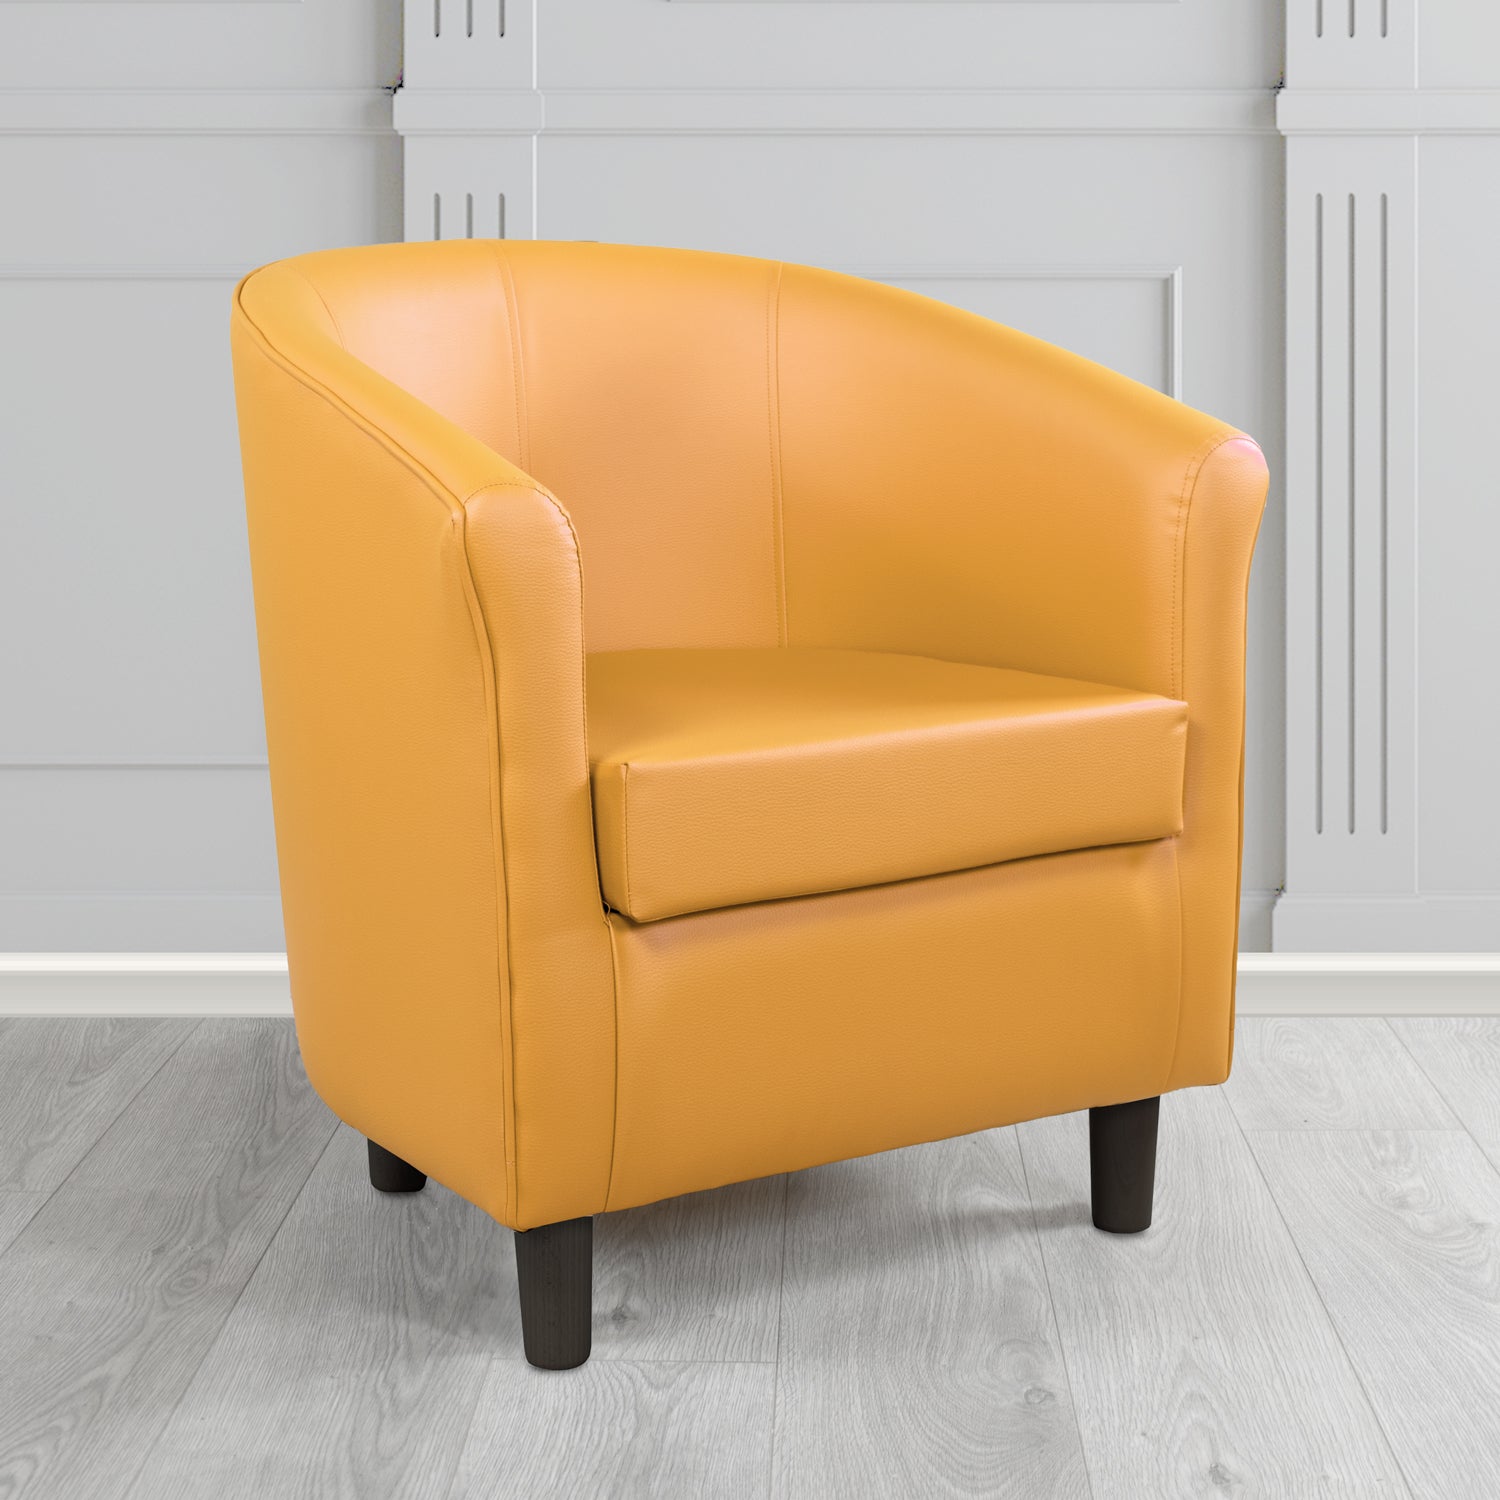 Tuscany Just Colour Sunblush Antimicrobial Crib 5 Contract Faux Leather Tub Chair - The Tub Chair Shop